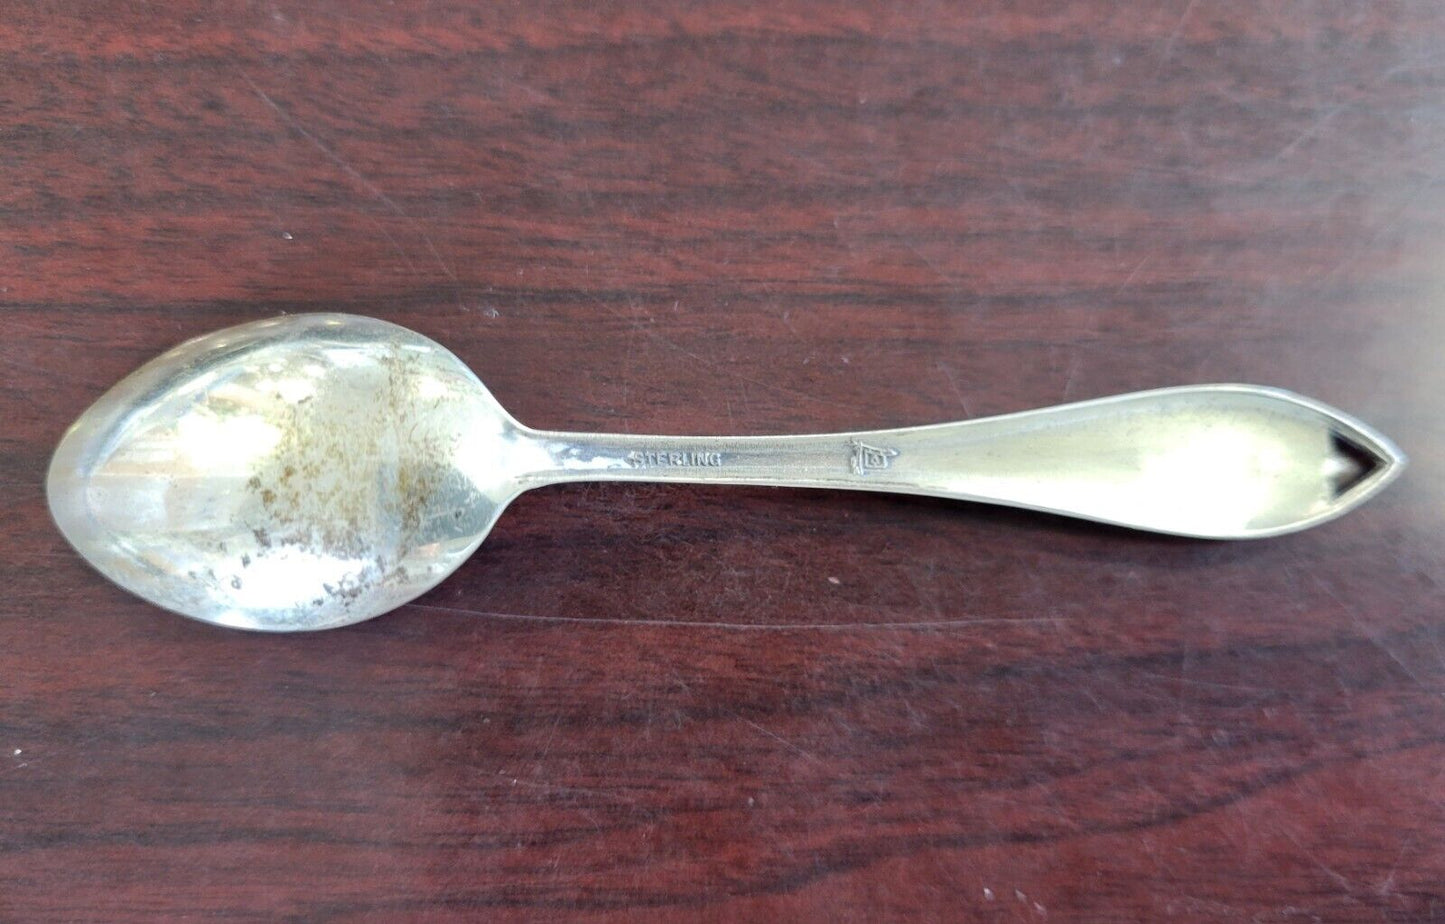 Sterling Souvenir Spoon 4 1/4" Nevada 36th  State By Bell Trading Post .28oz.